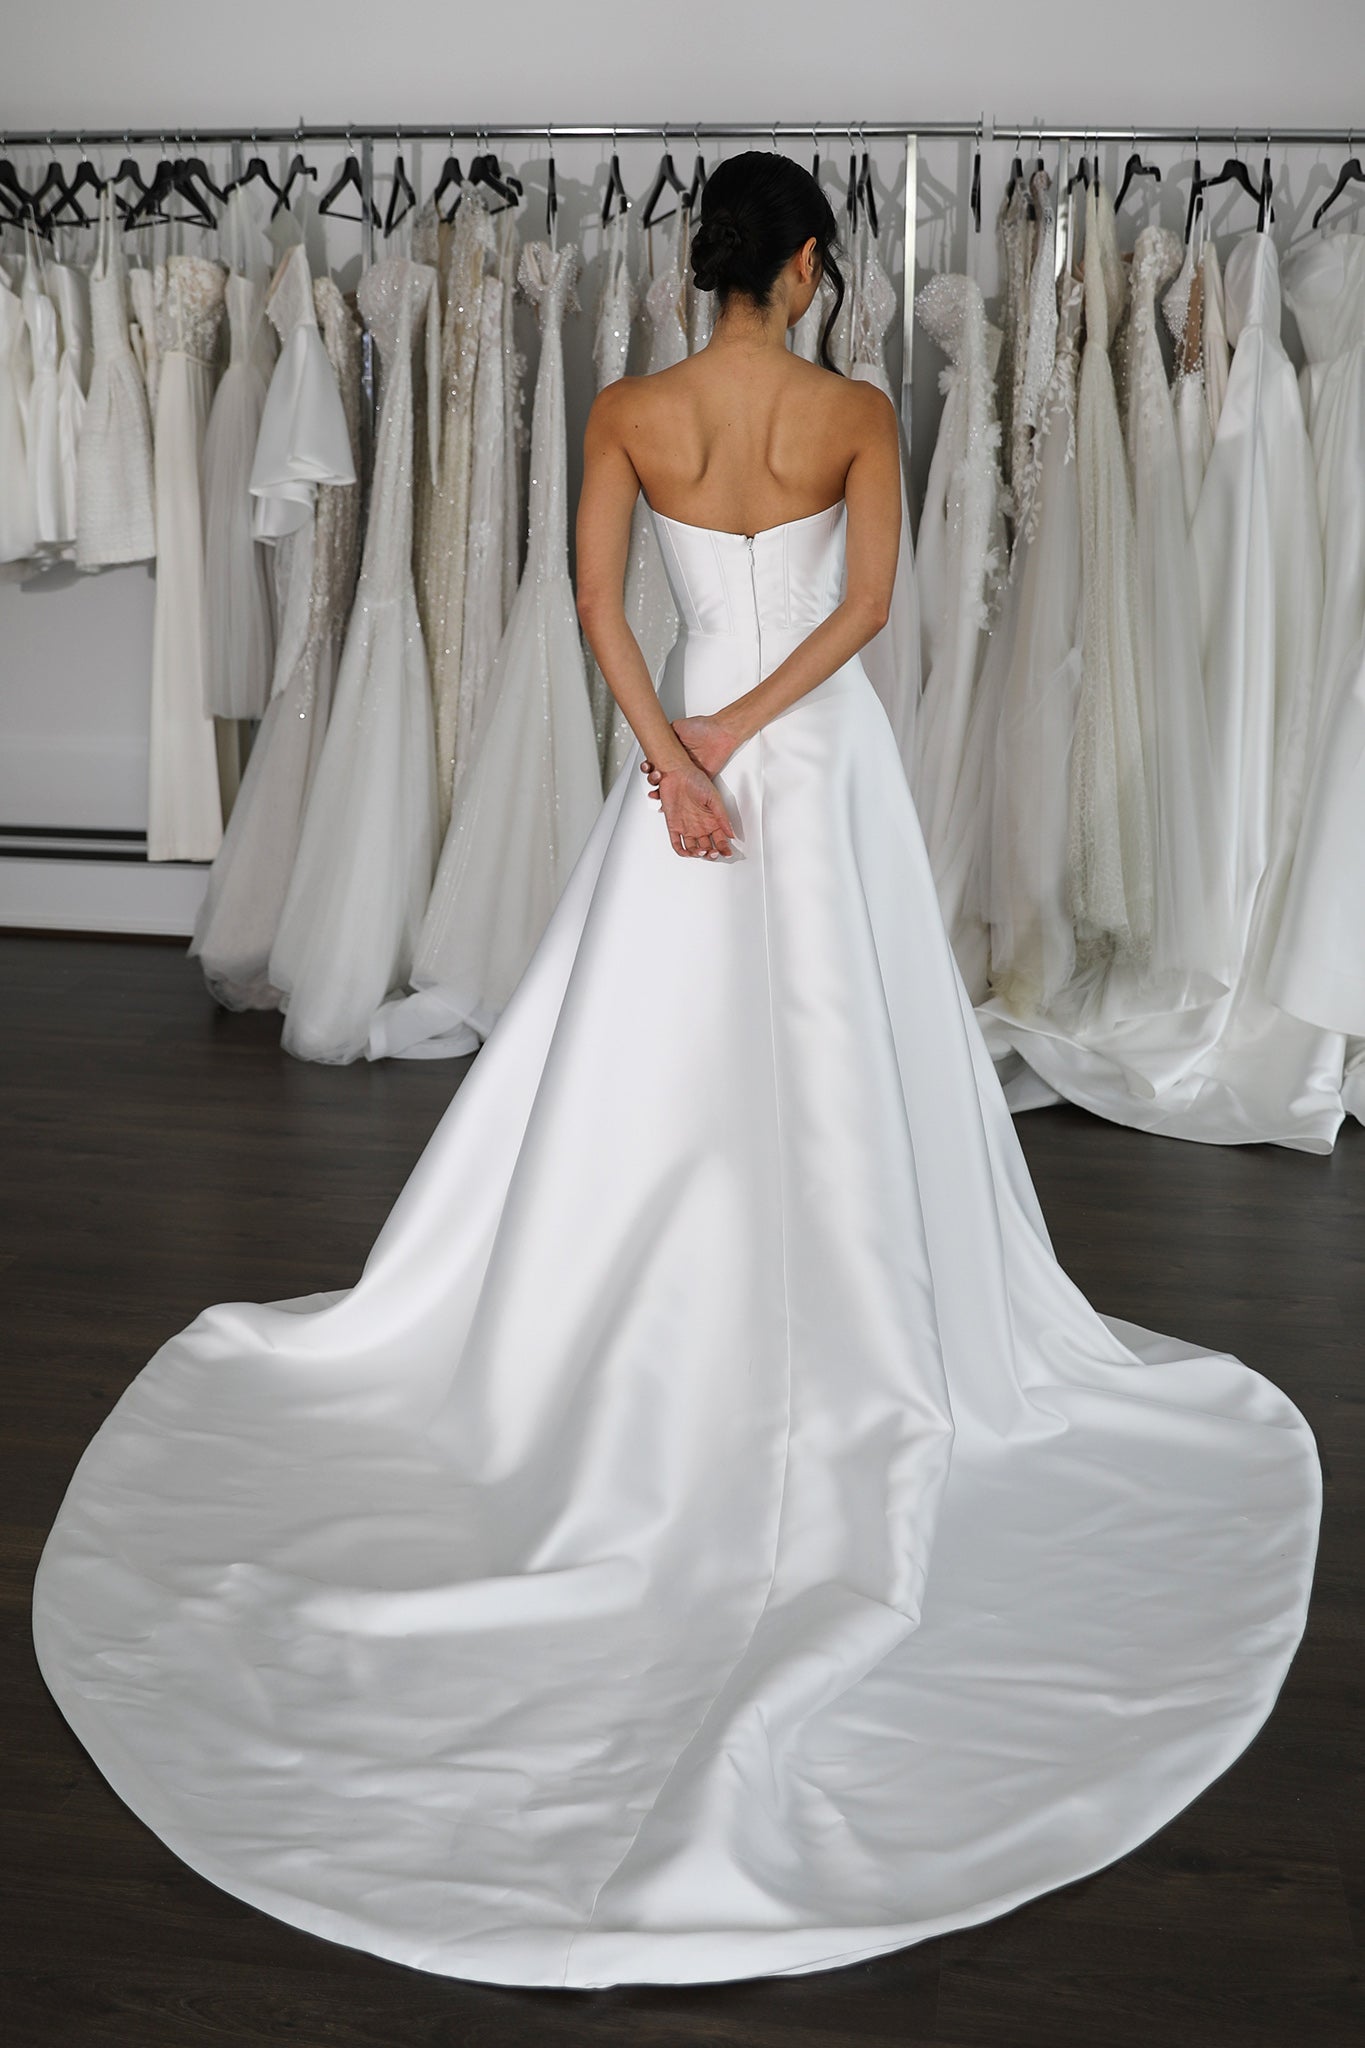 white mikado wedding dress with no straps and a dramatic skirt train